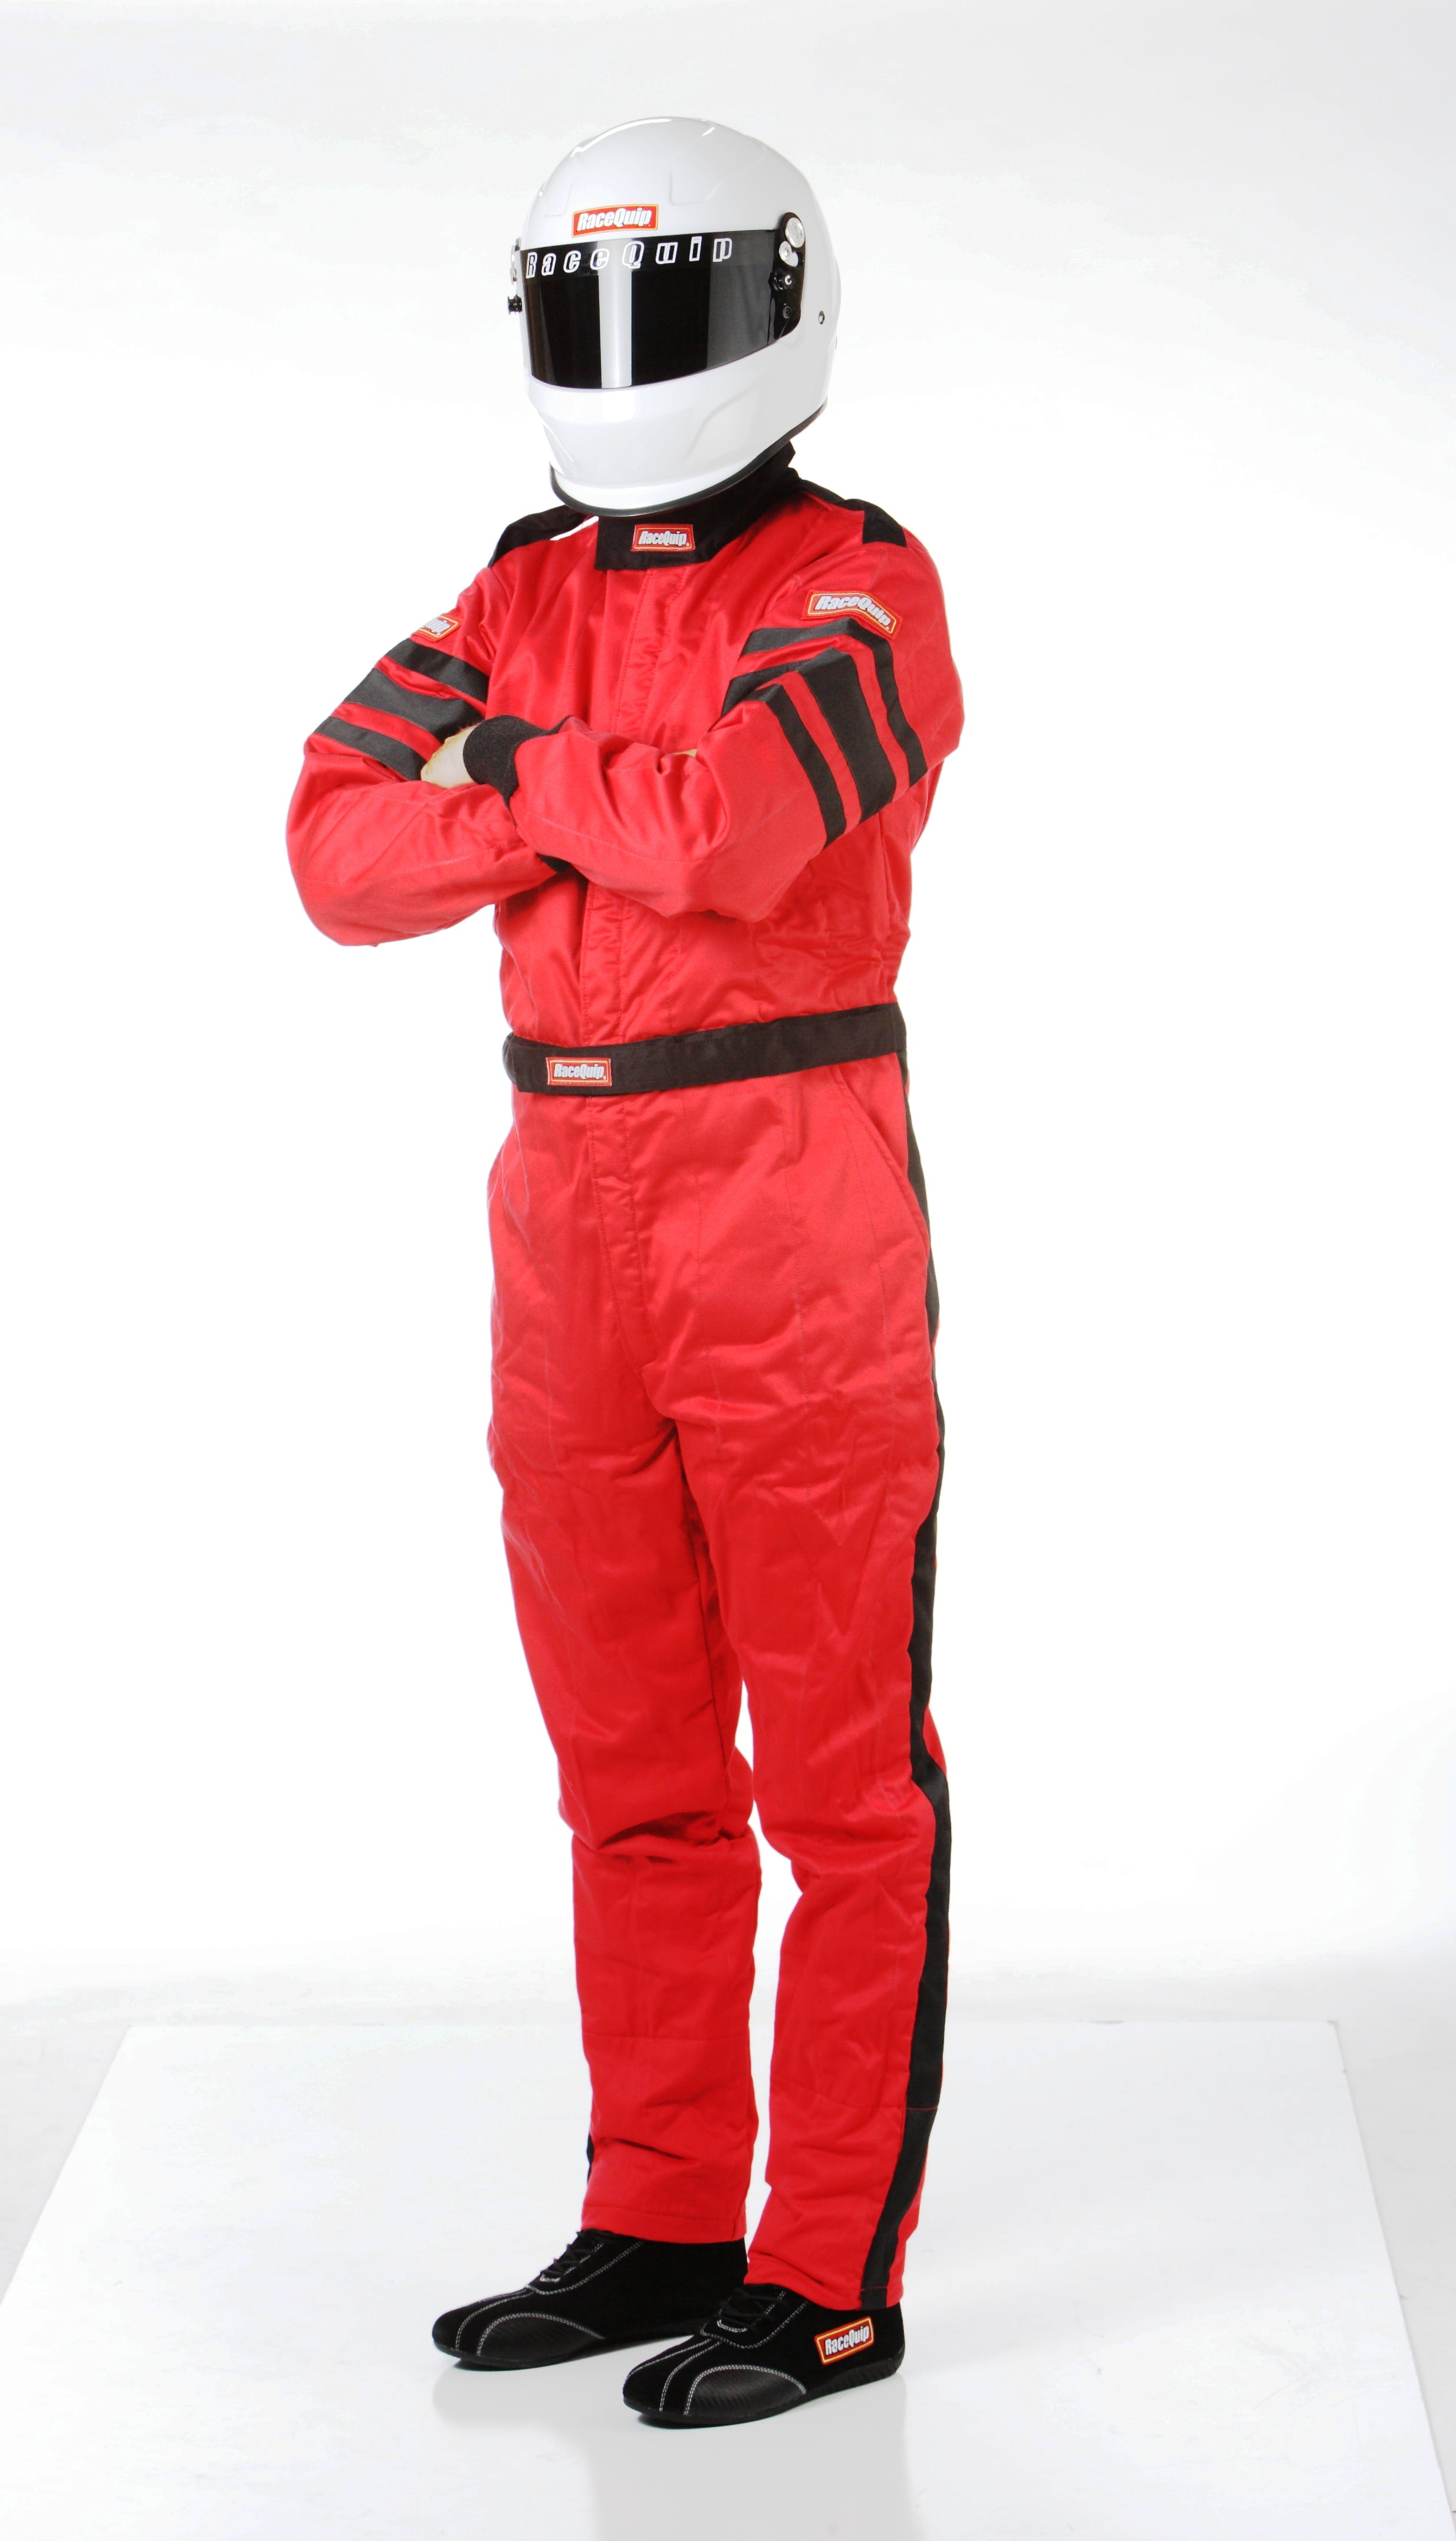 RaceQuip 120016 SFI-5 Pyrovatex One-Piece Multi-Layer Racing Fire Suit (Red, X-Large)